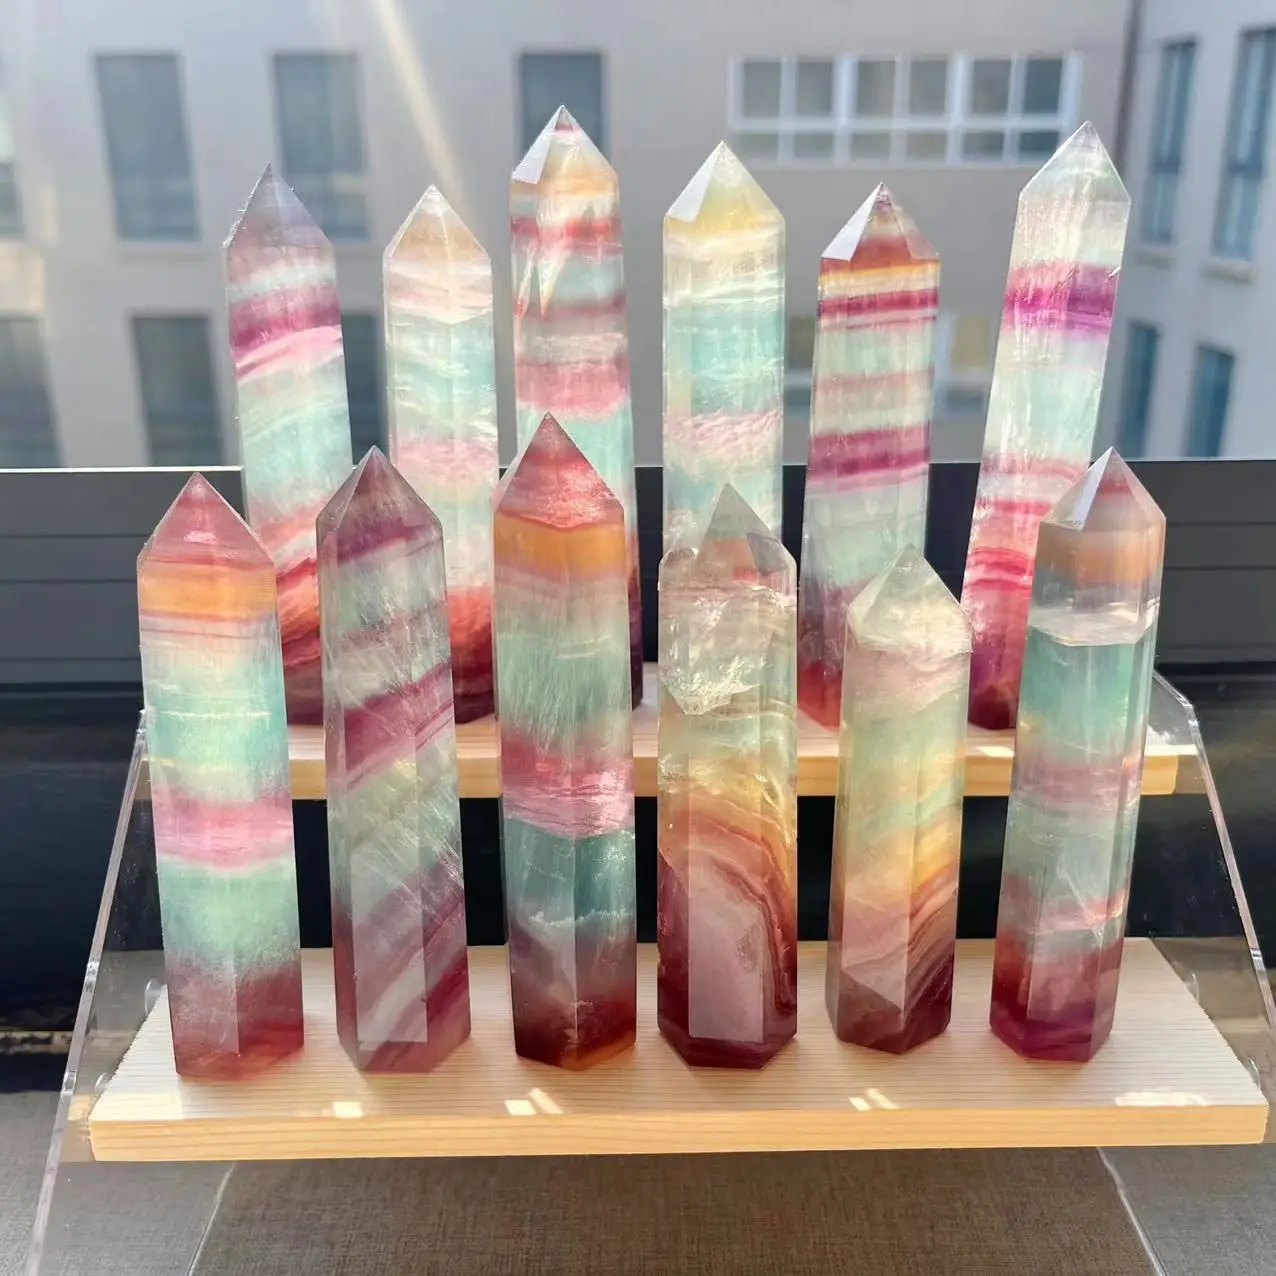 

Wholesale natural stone rainbow fluorite point polished healing crystal tower for home decoration or gift.